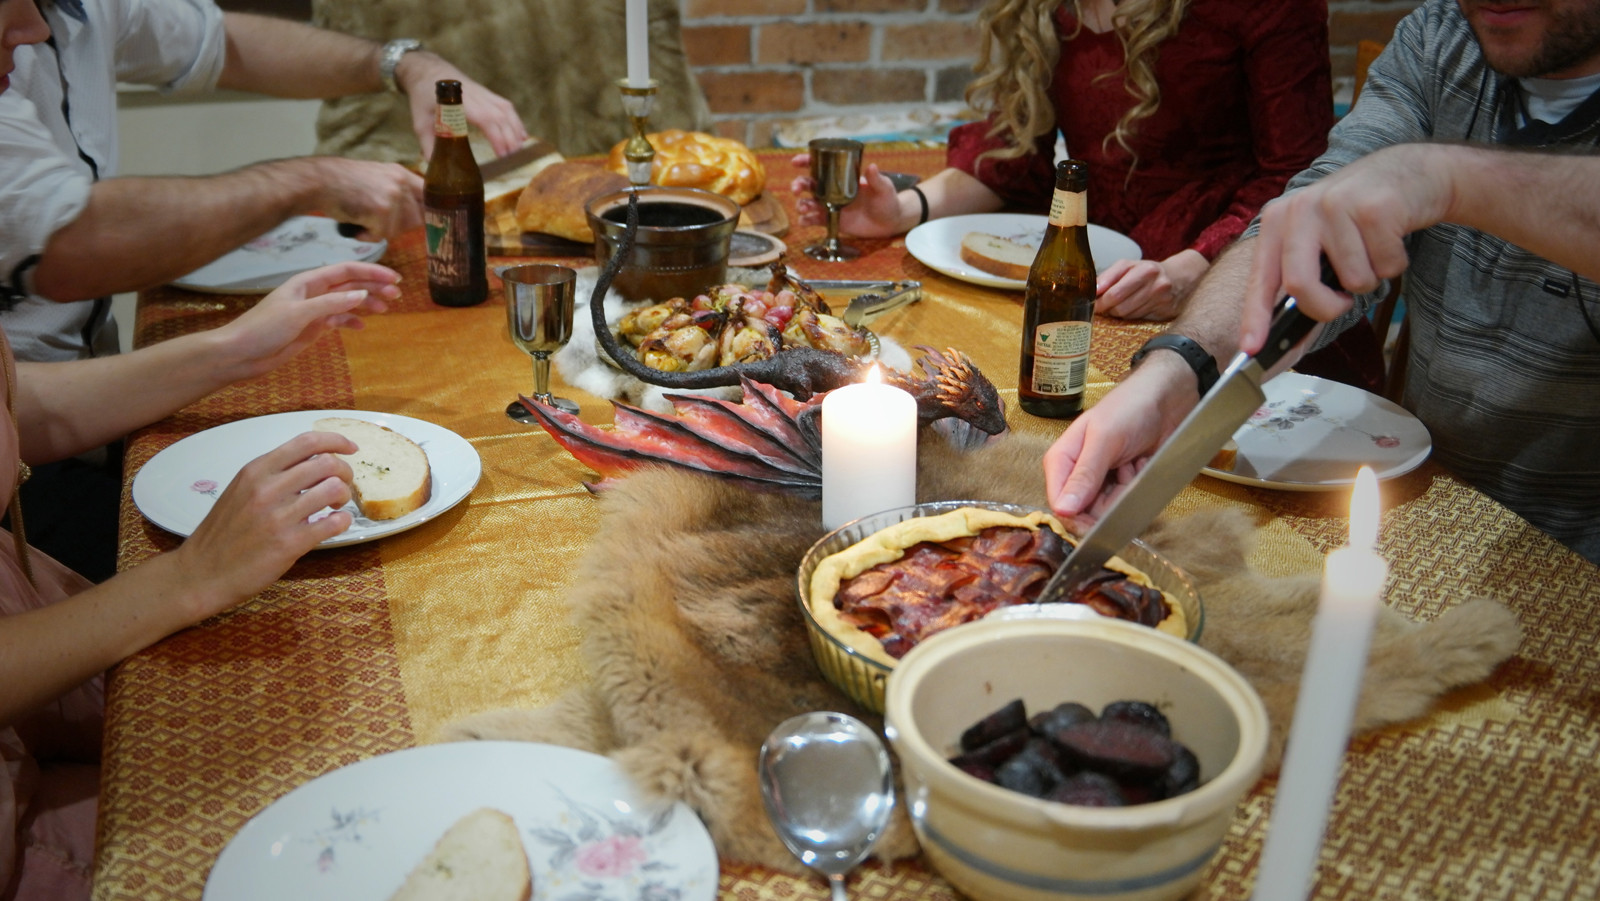 Game Of Thrones Dinner Party Ideas
 How To Throw The Best Game Thrones Premiere Party Ever